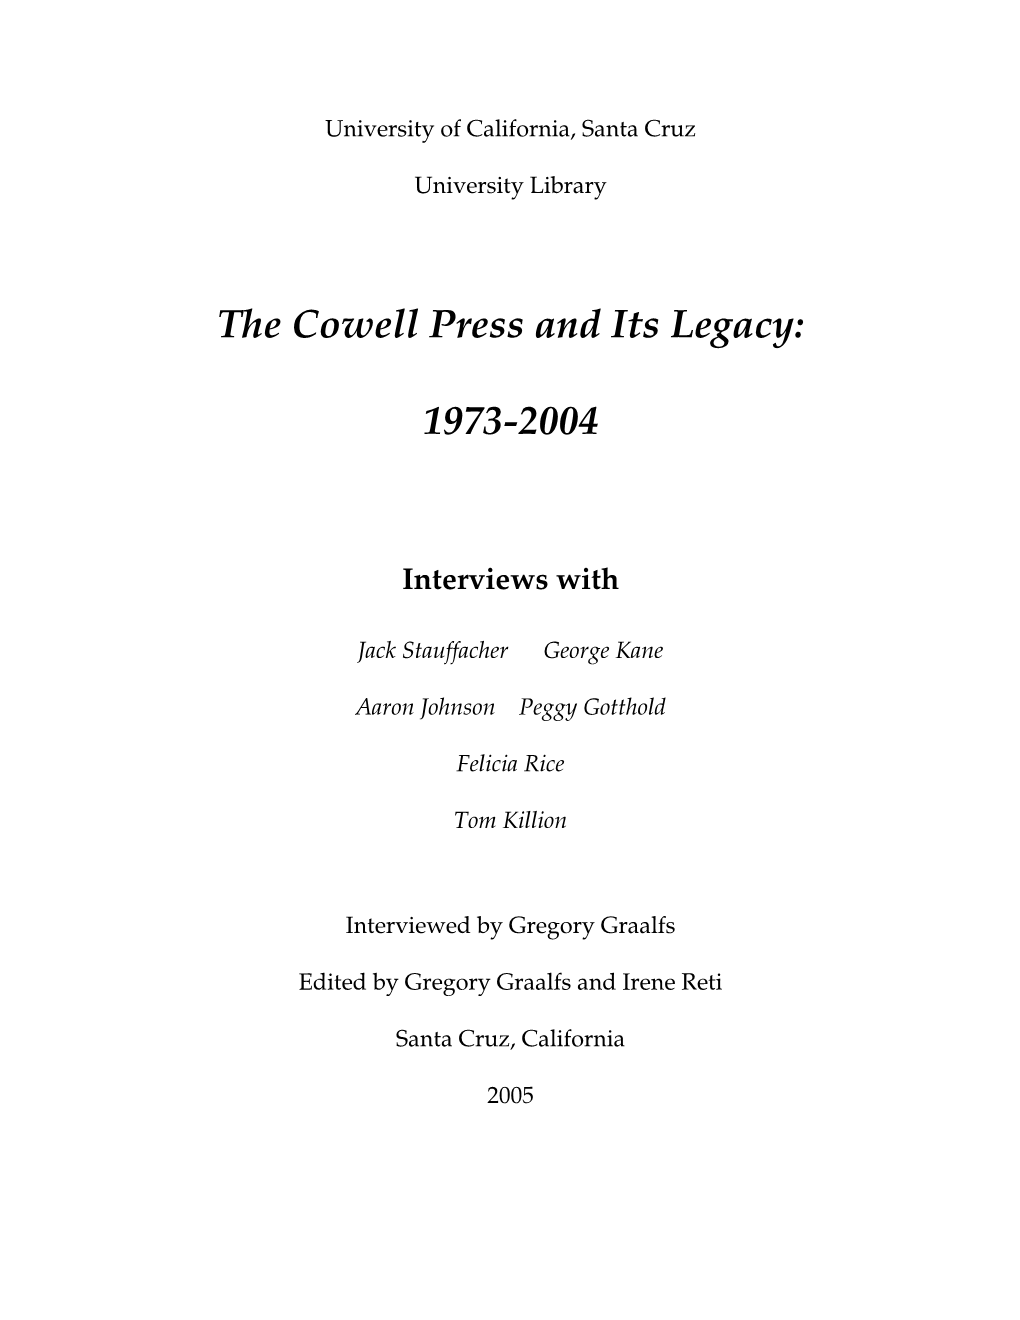 The Cowell Press and Its Legacy: 1973-2004